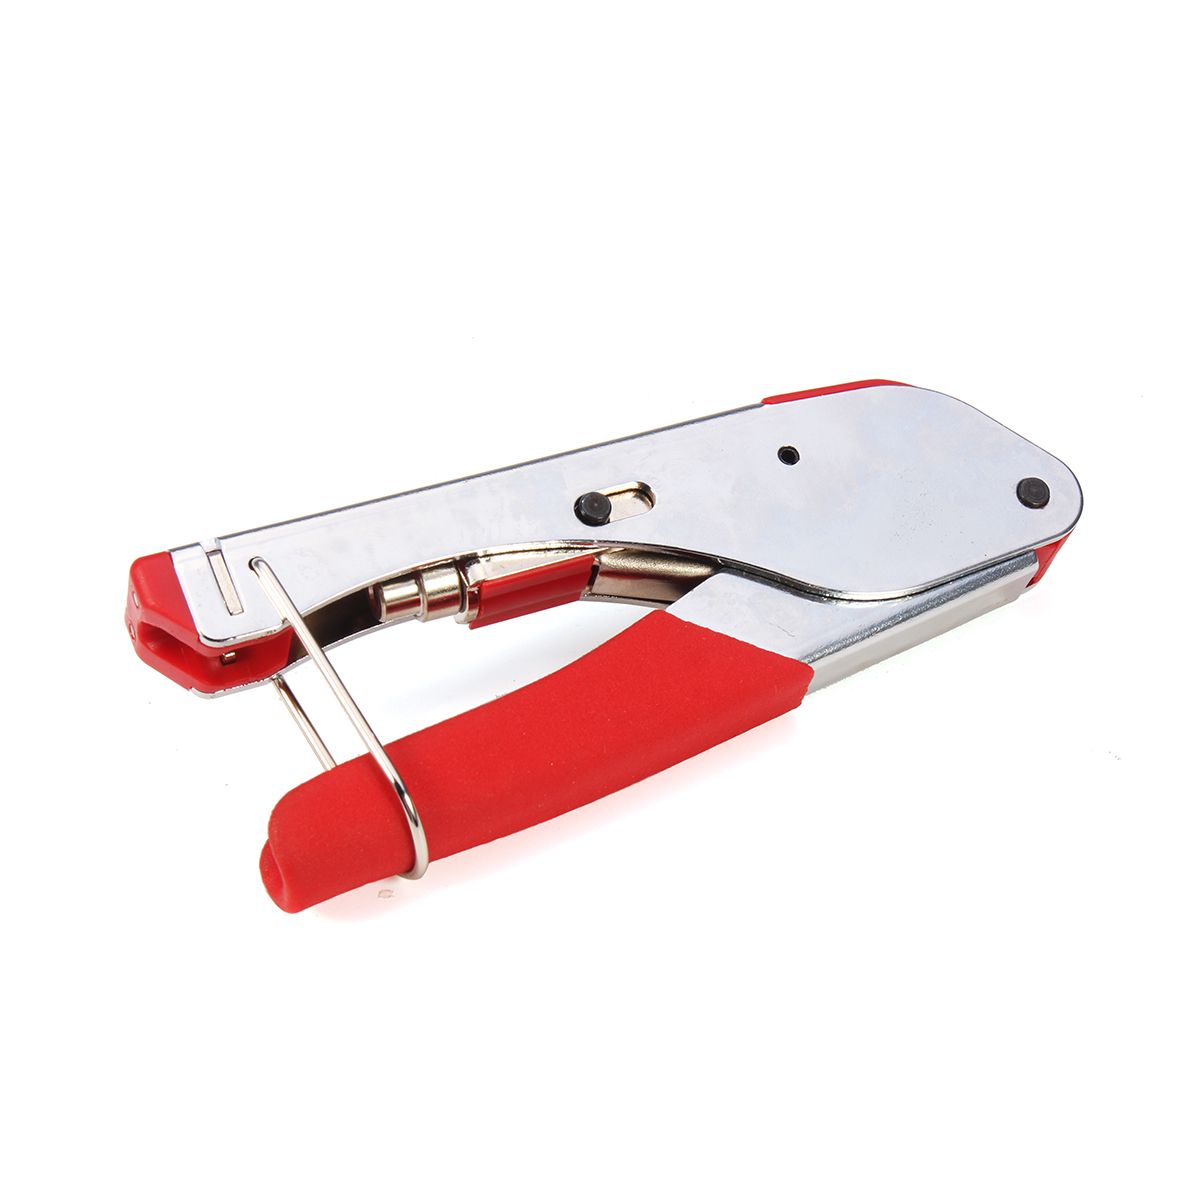 F-Type-Compression-Crimper-Hand-Tool-Rotary-Coaxial-Cable-Cutter-Crimp-Connector-1263027